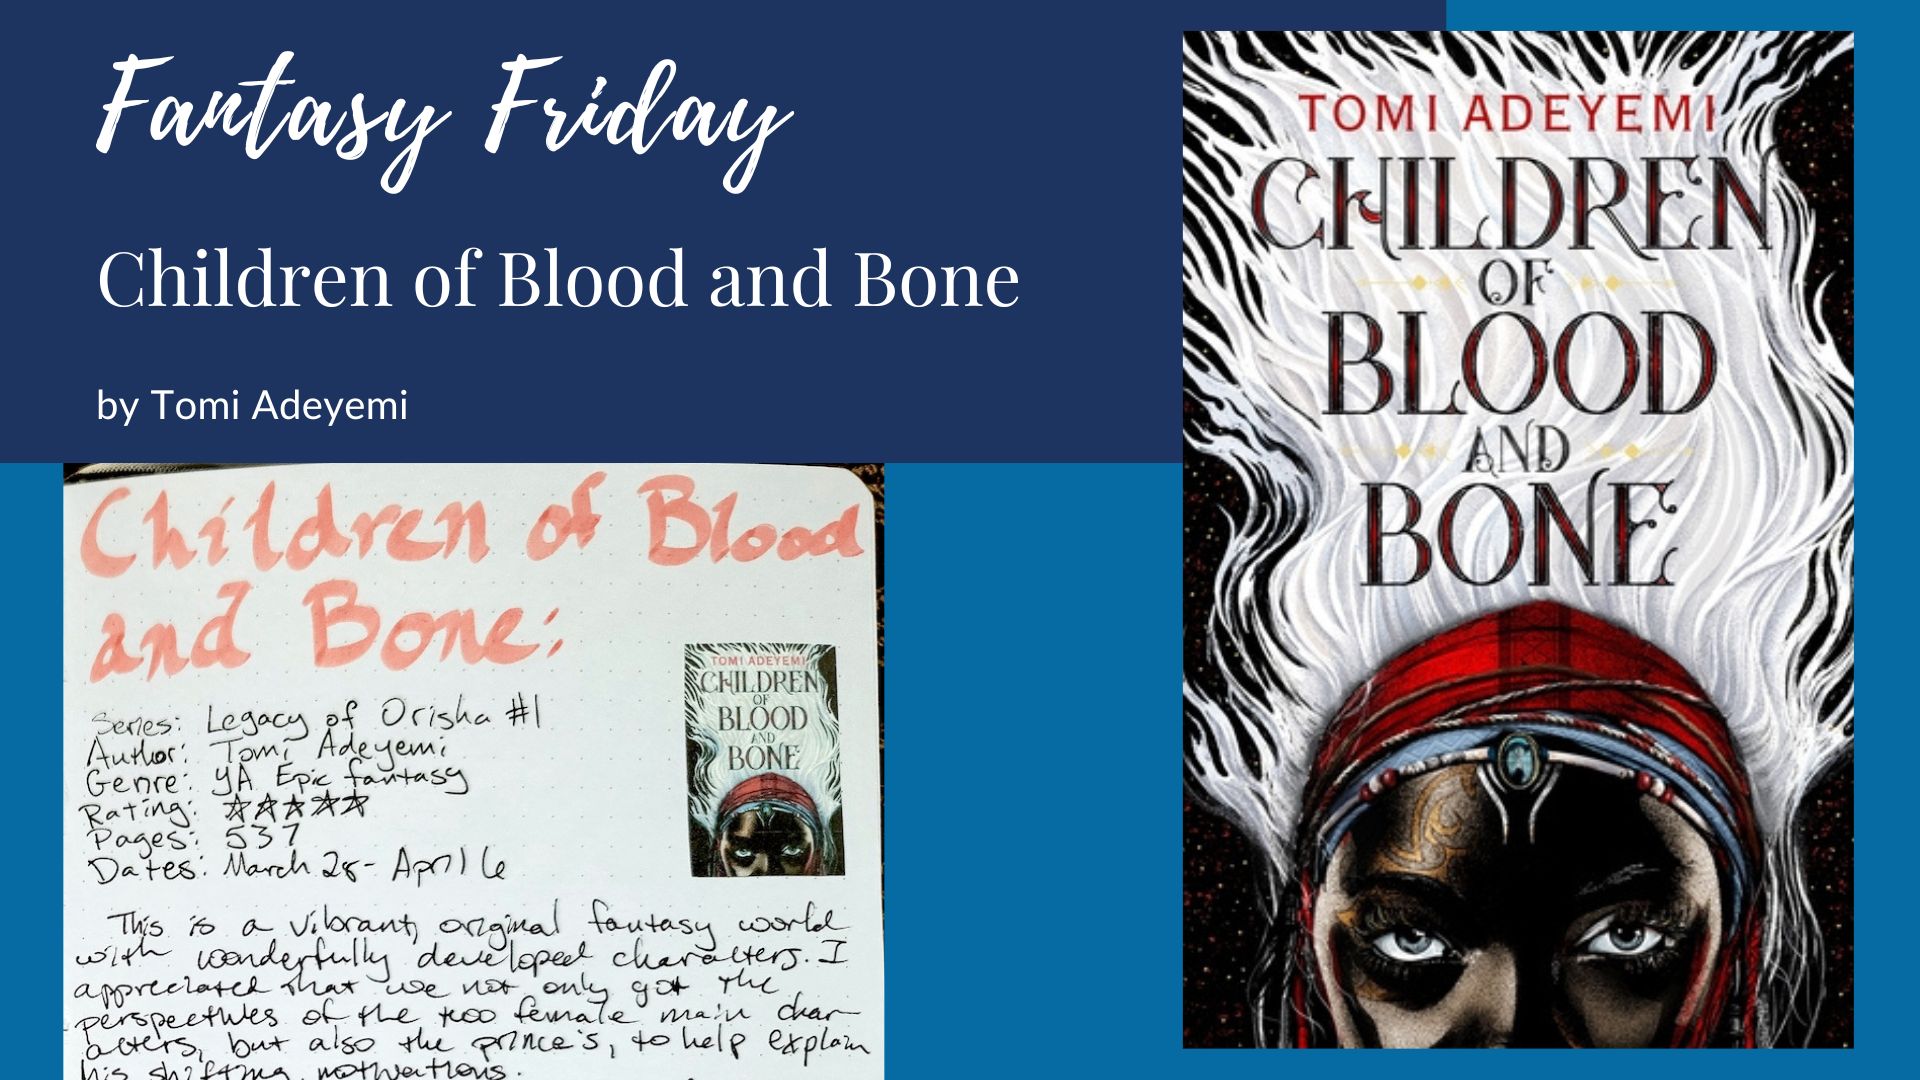 You are currently viewing Fantasy Friday: Children of Blood and Bone by Tomi Adeyemi